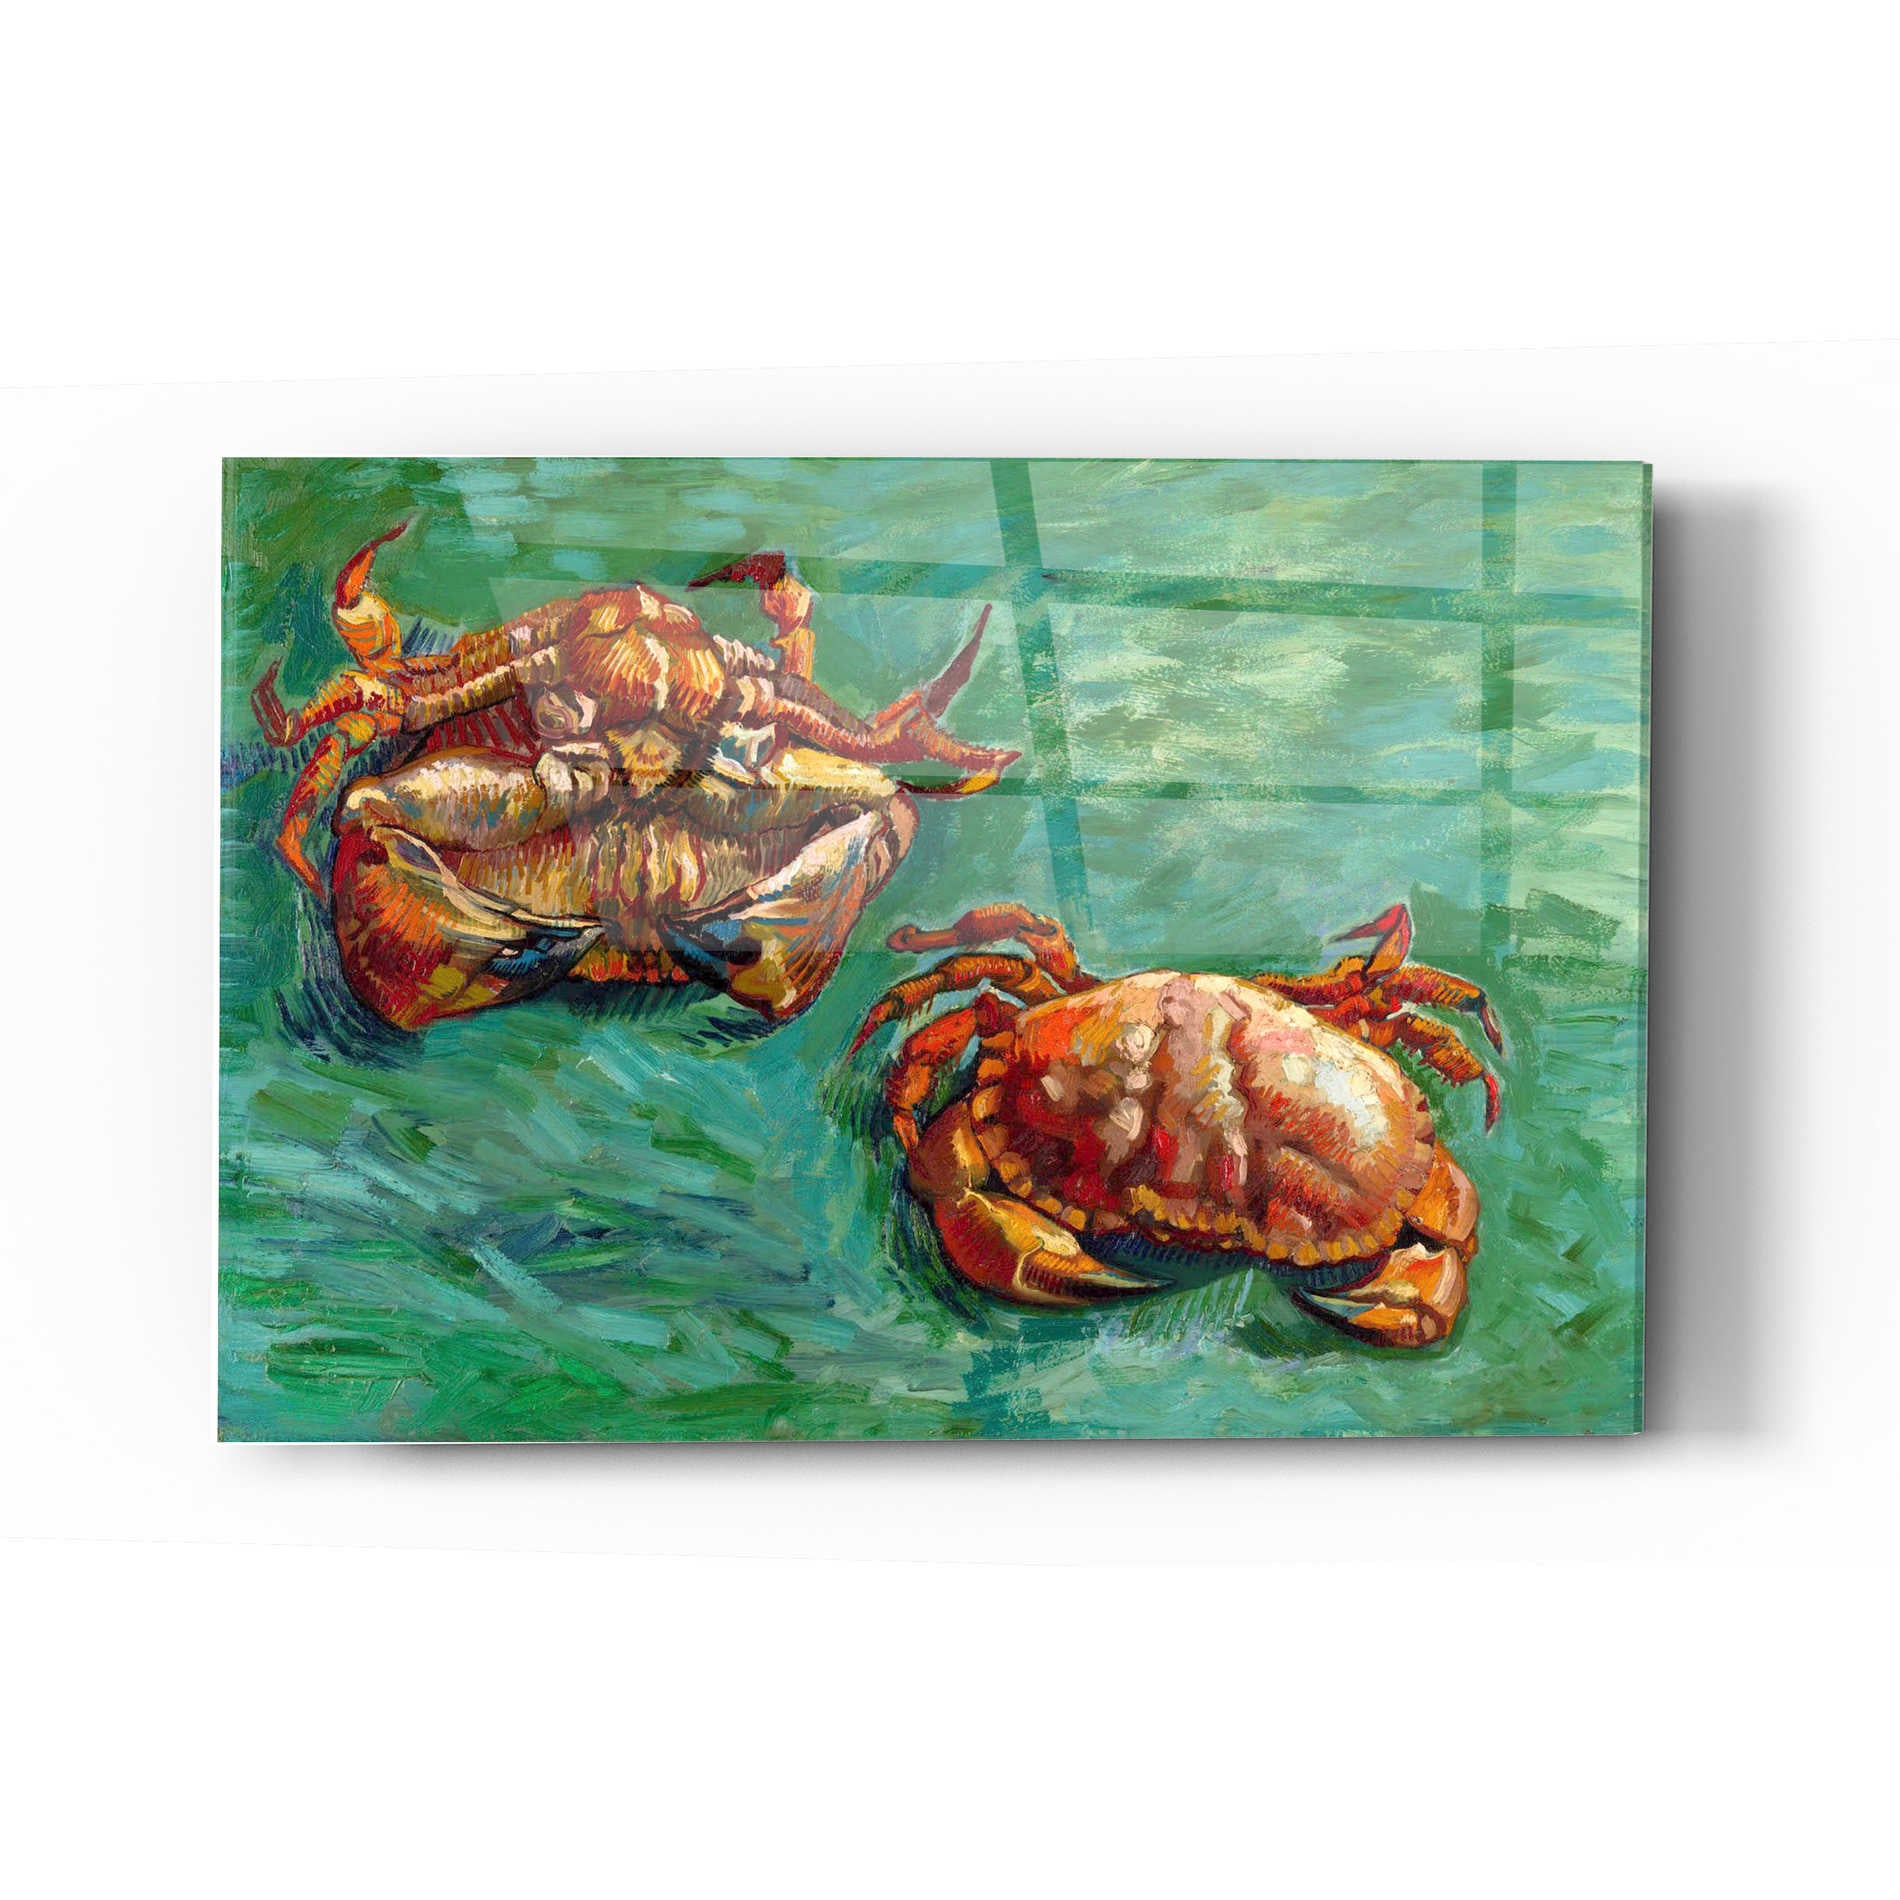 Epic Art 'Two Crabs' by Vincent Van Gogh Acrylic Glass Wall Art,12x16